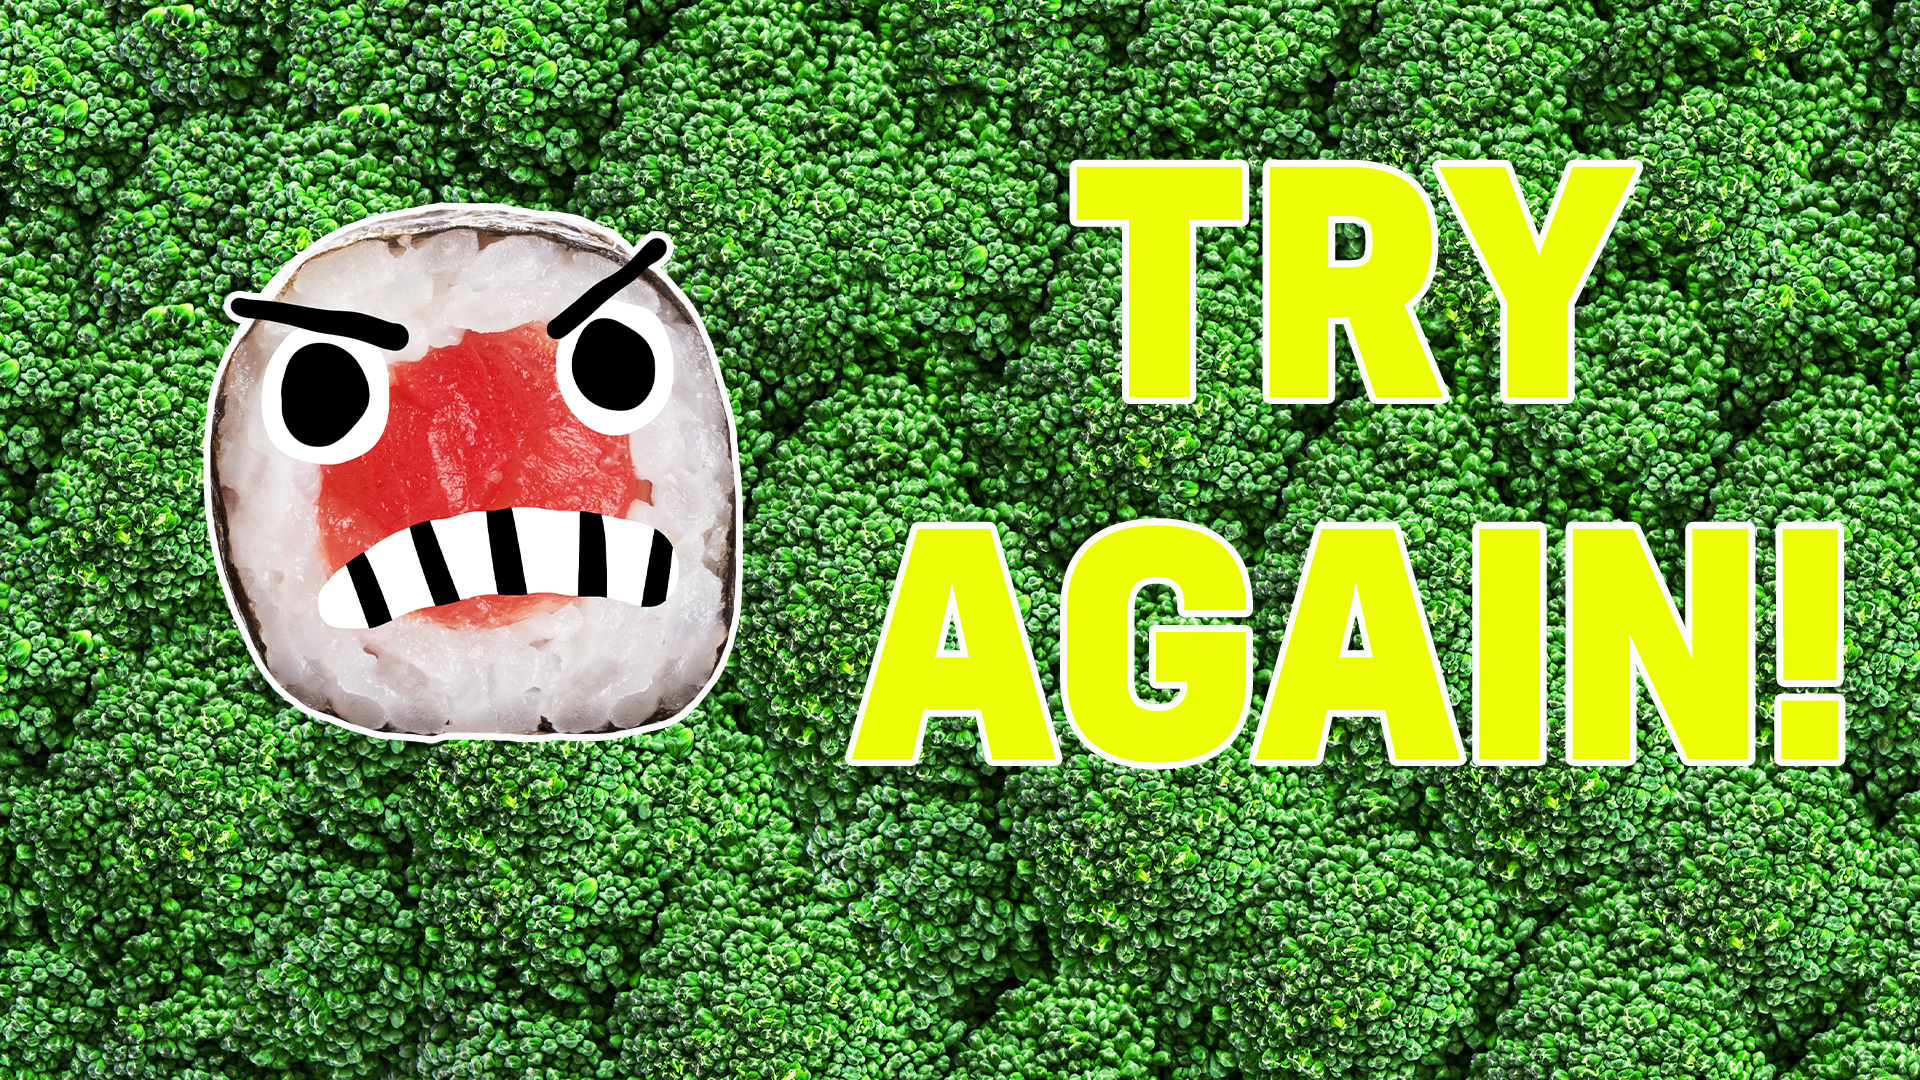 Bad luck, we know you can do better! Try again and see what else you know about Tiny Chef and his delicious dishes. 